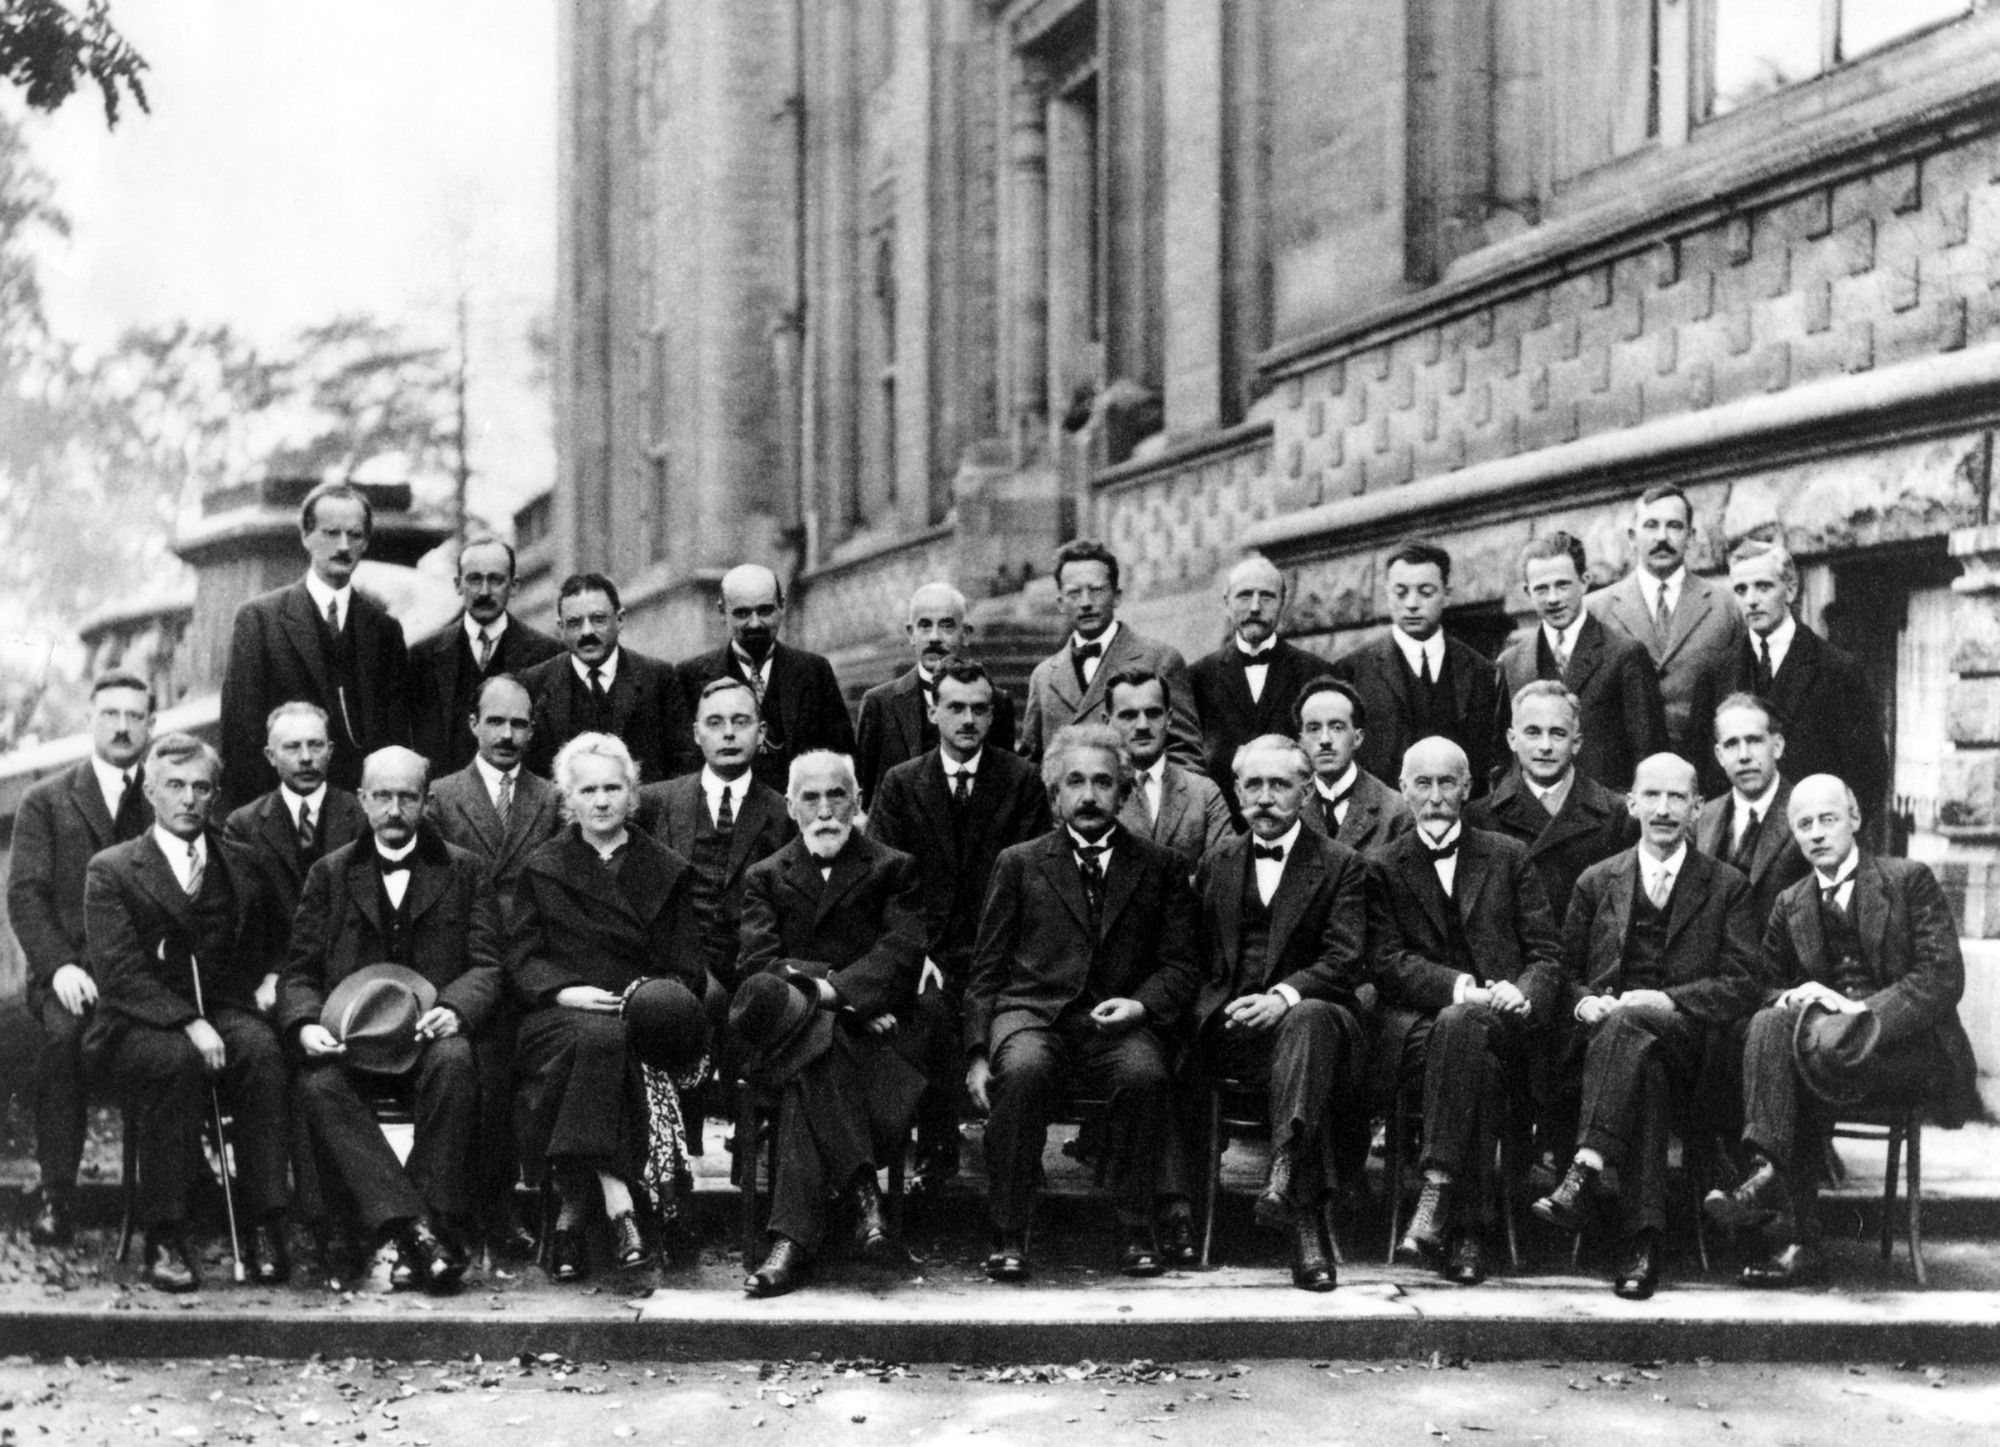 A photo of attendees of the Solvay Conference in 1927, including Schrödinger, Pauli, Heisenberg, Dirac, de Broglie, Born, Bohr, Planck, Curie, Lorentz and Einstein, among others.